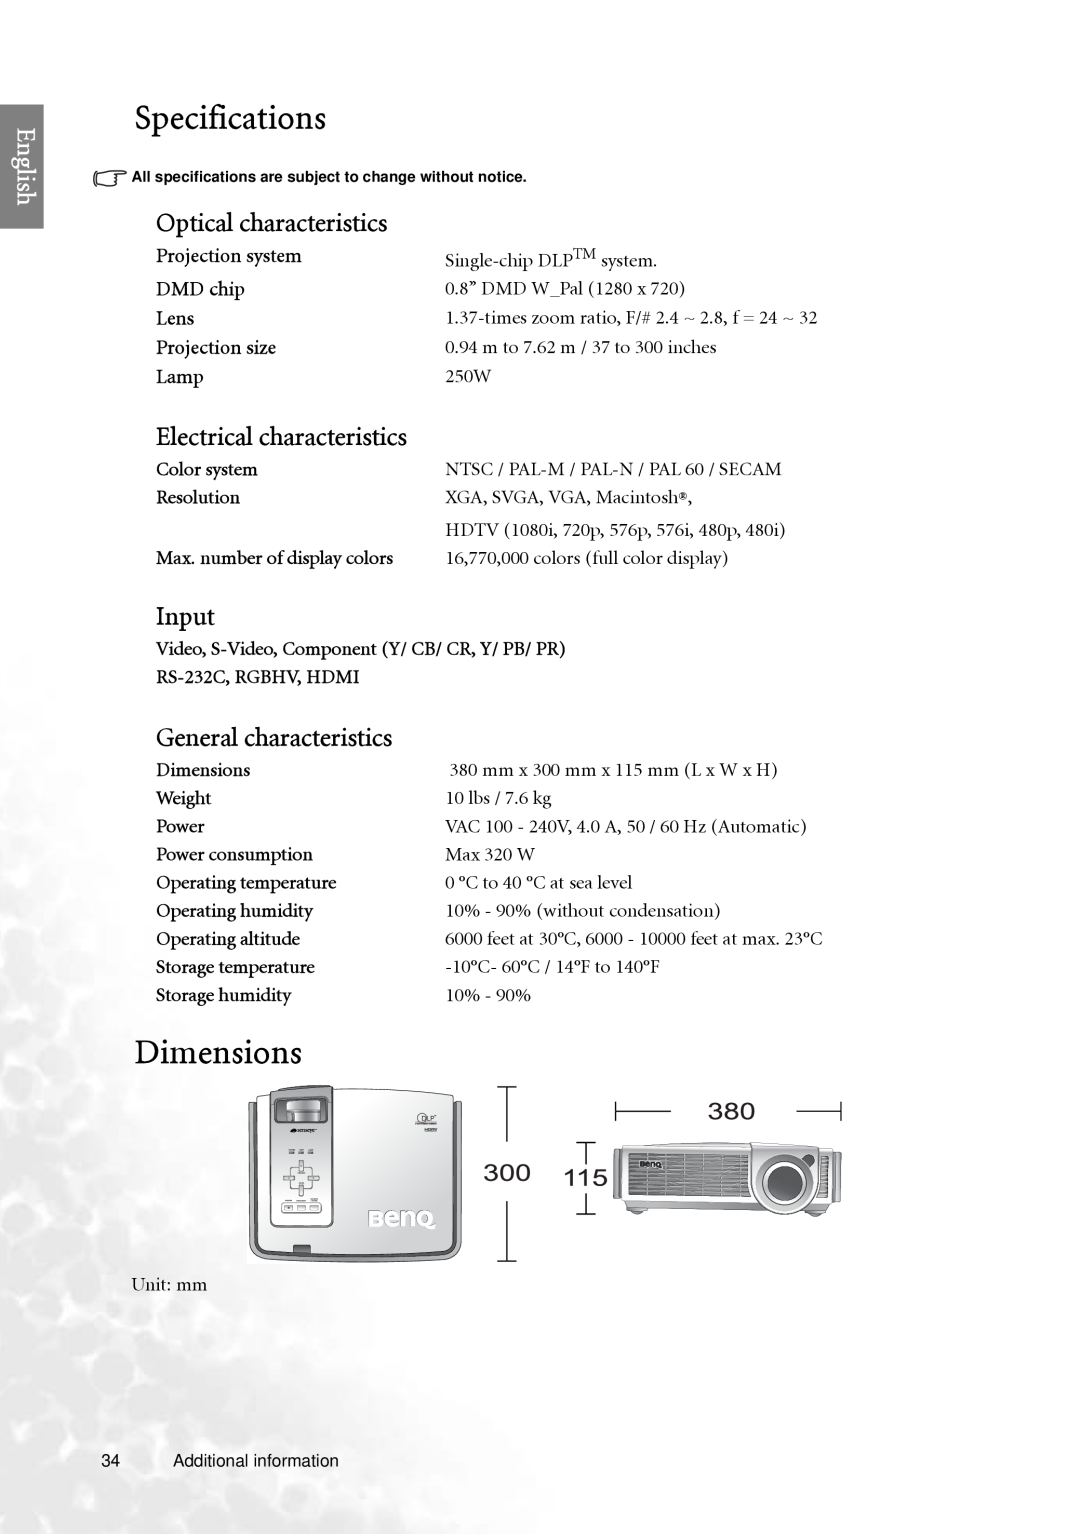 BenQ PE7700 Specifications, Dimensions, Optical characteristics, Electrical characteristics, Input, English, Color system 